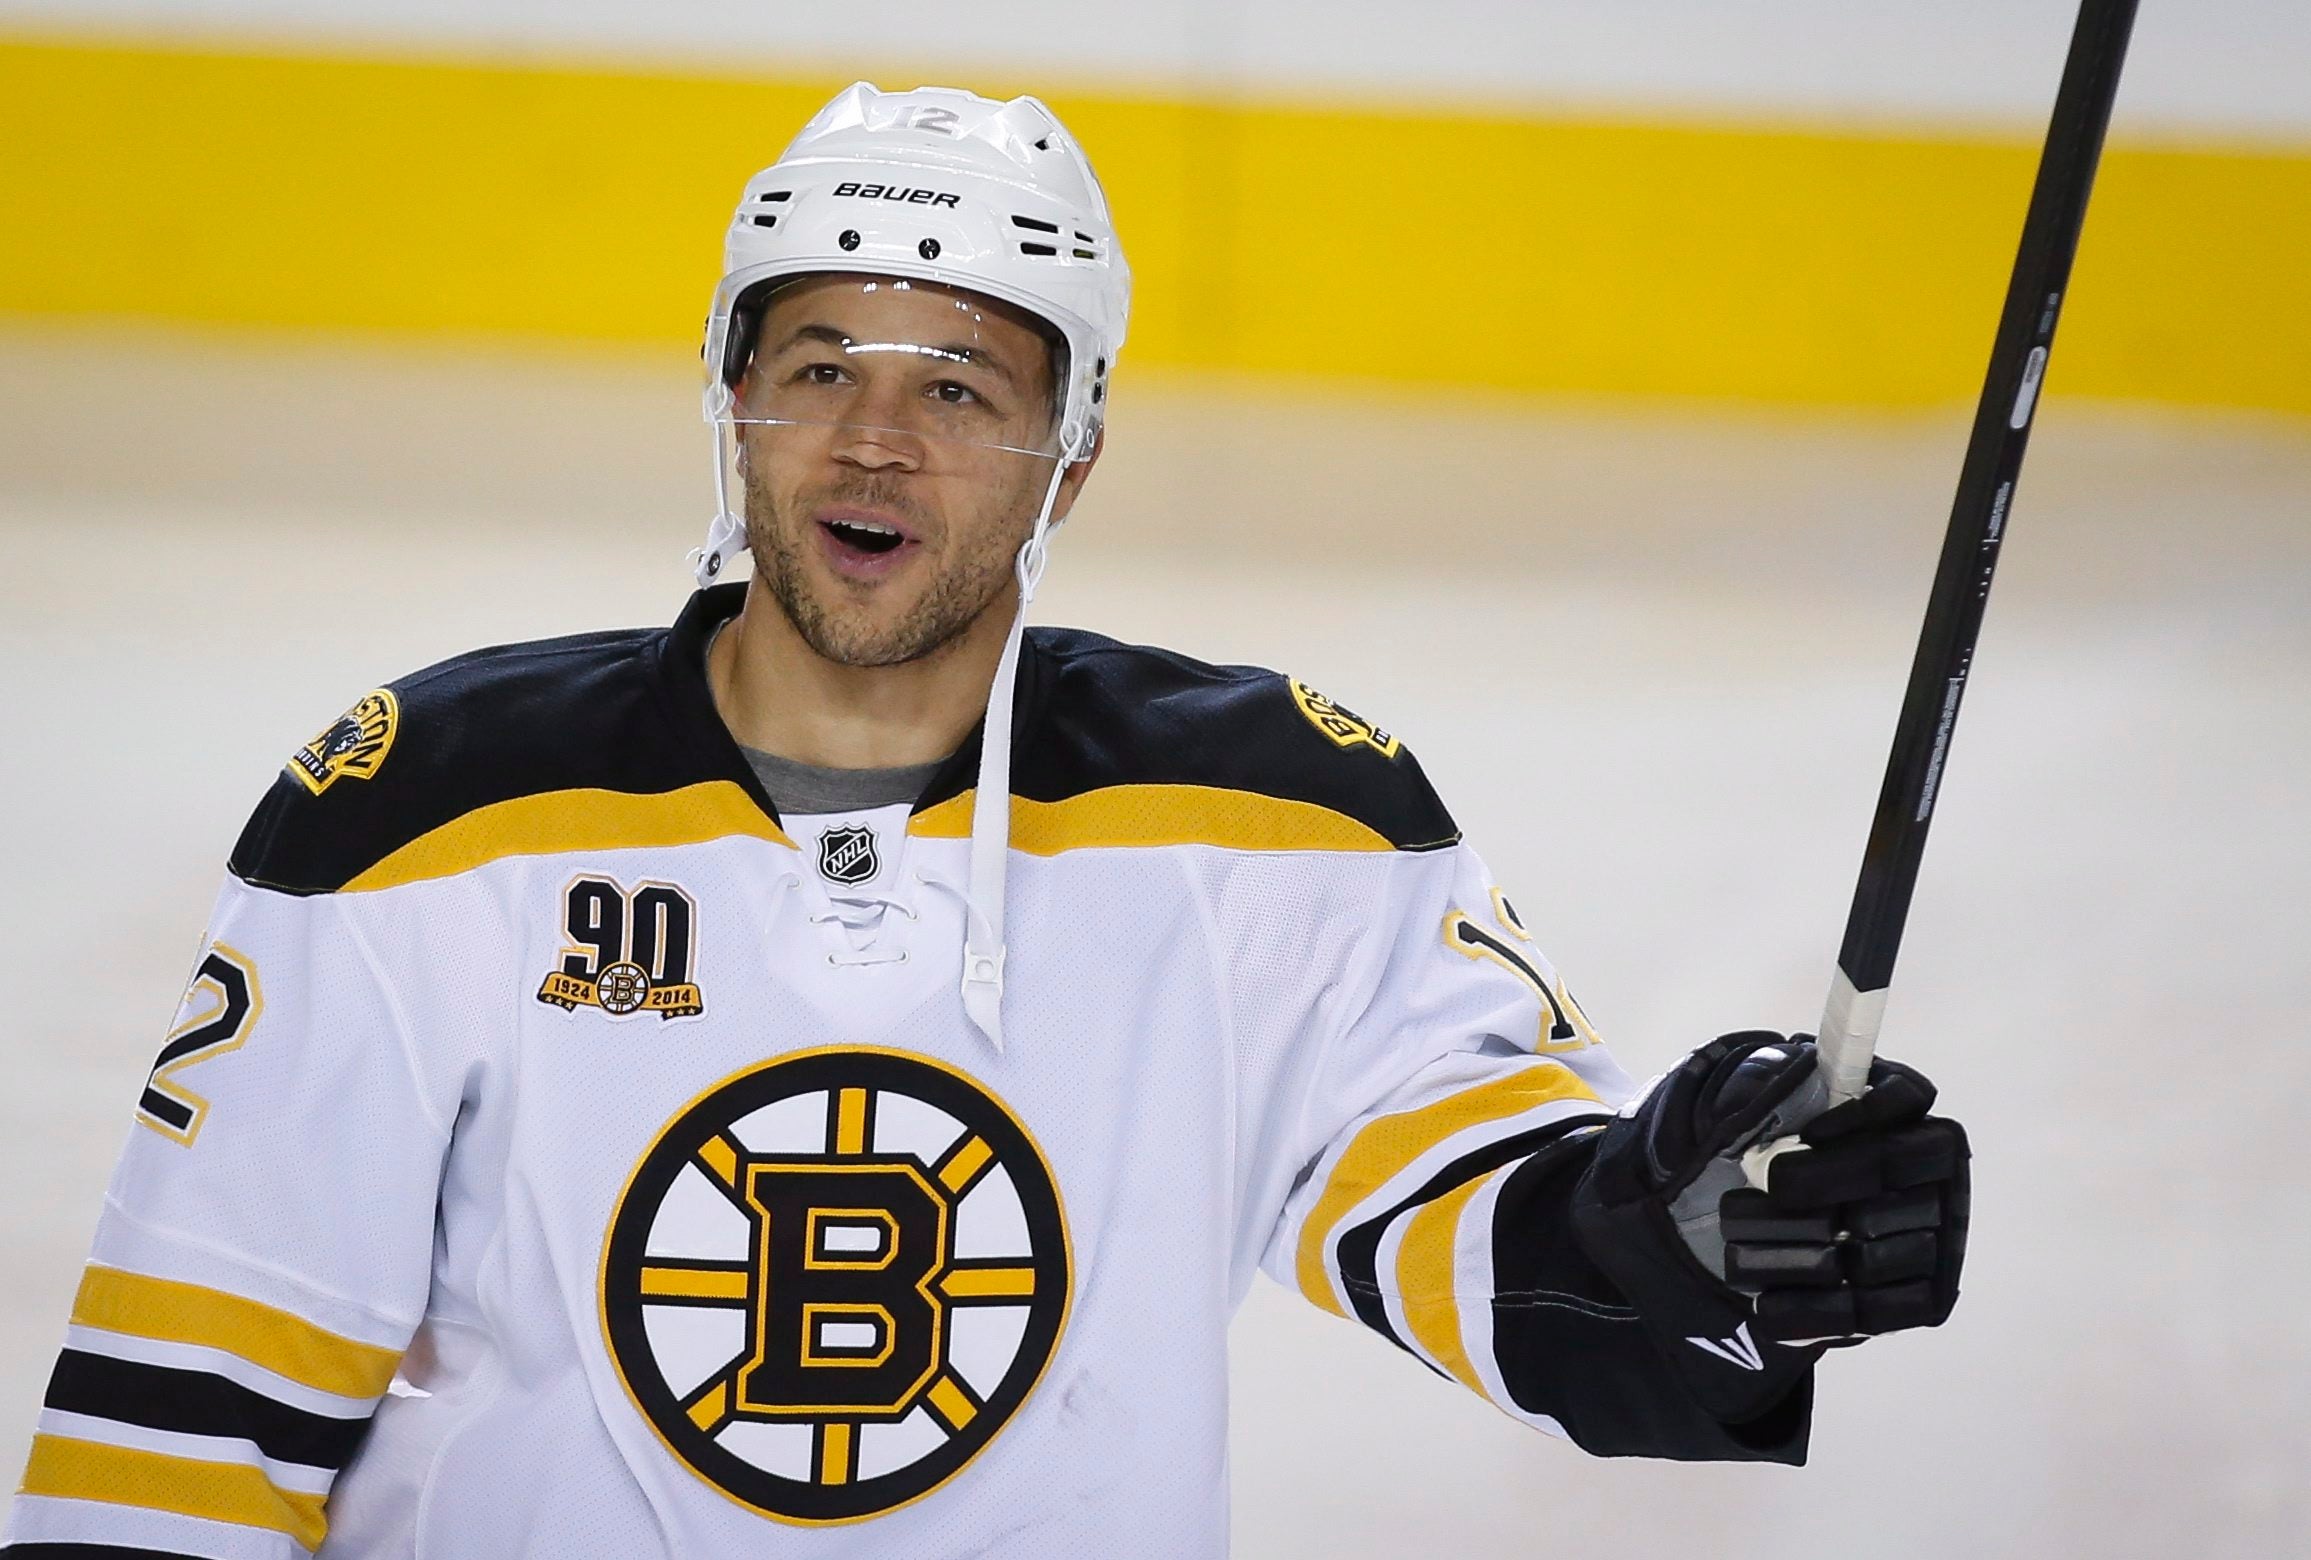 Jarome Iginla leads Bruins past Red Wings in OT